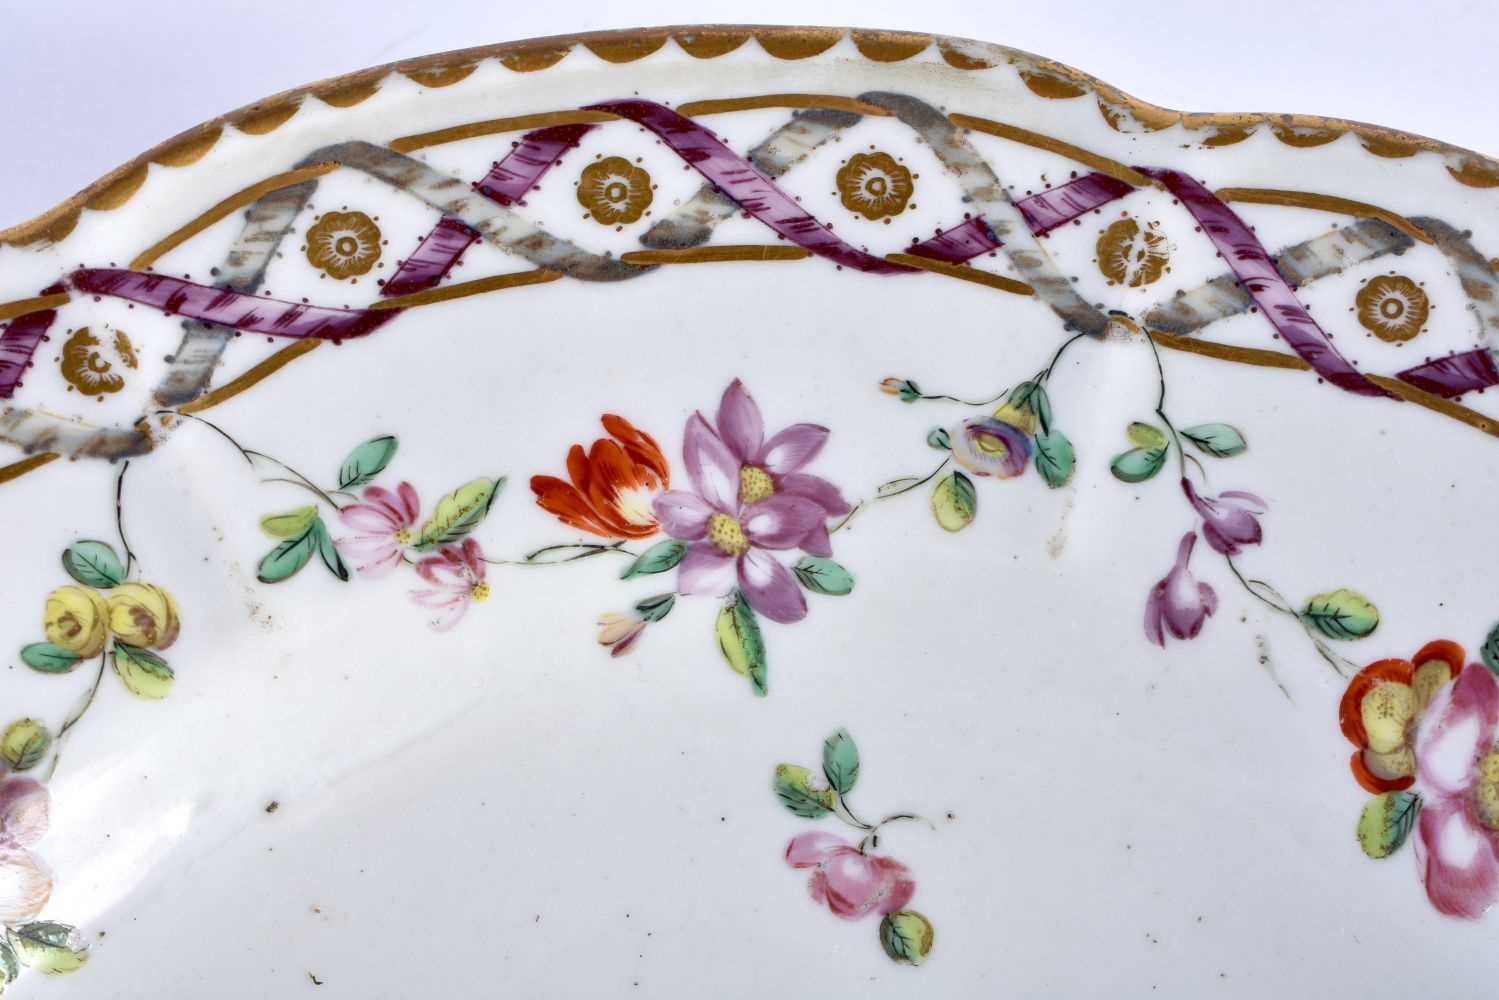 18th century Bristol plate with entwined ribbon border painted with a central flower, chains of - Image 3 of 3